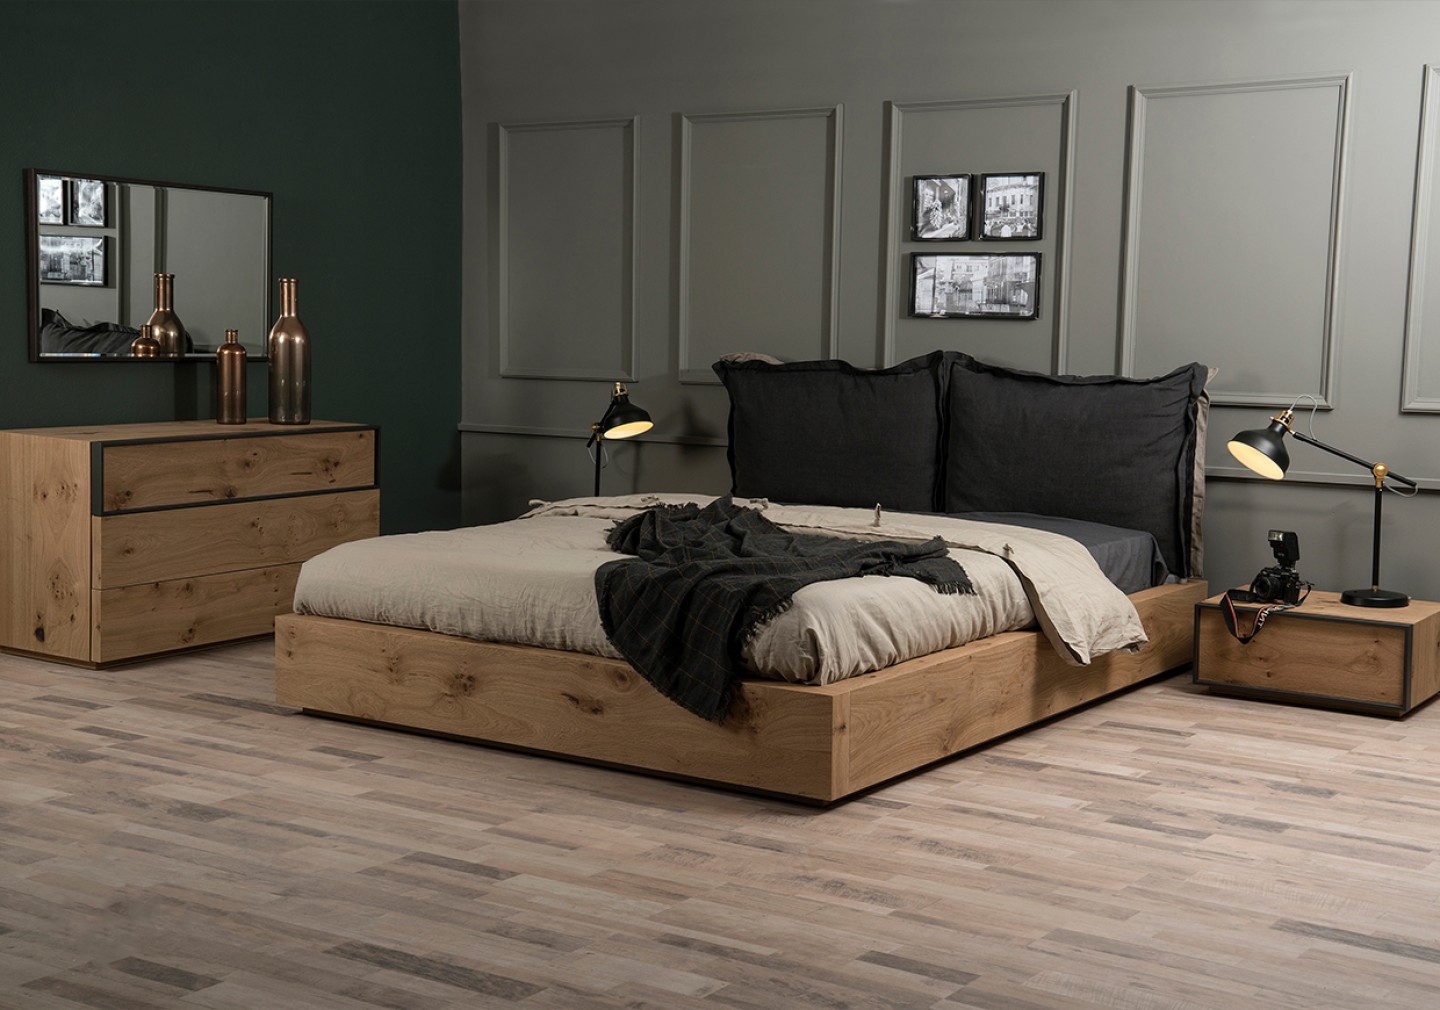 THE ALBERO BEDROOM COLLECTION